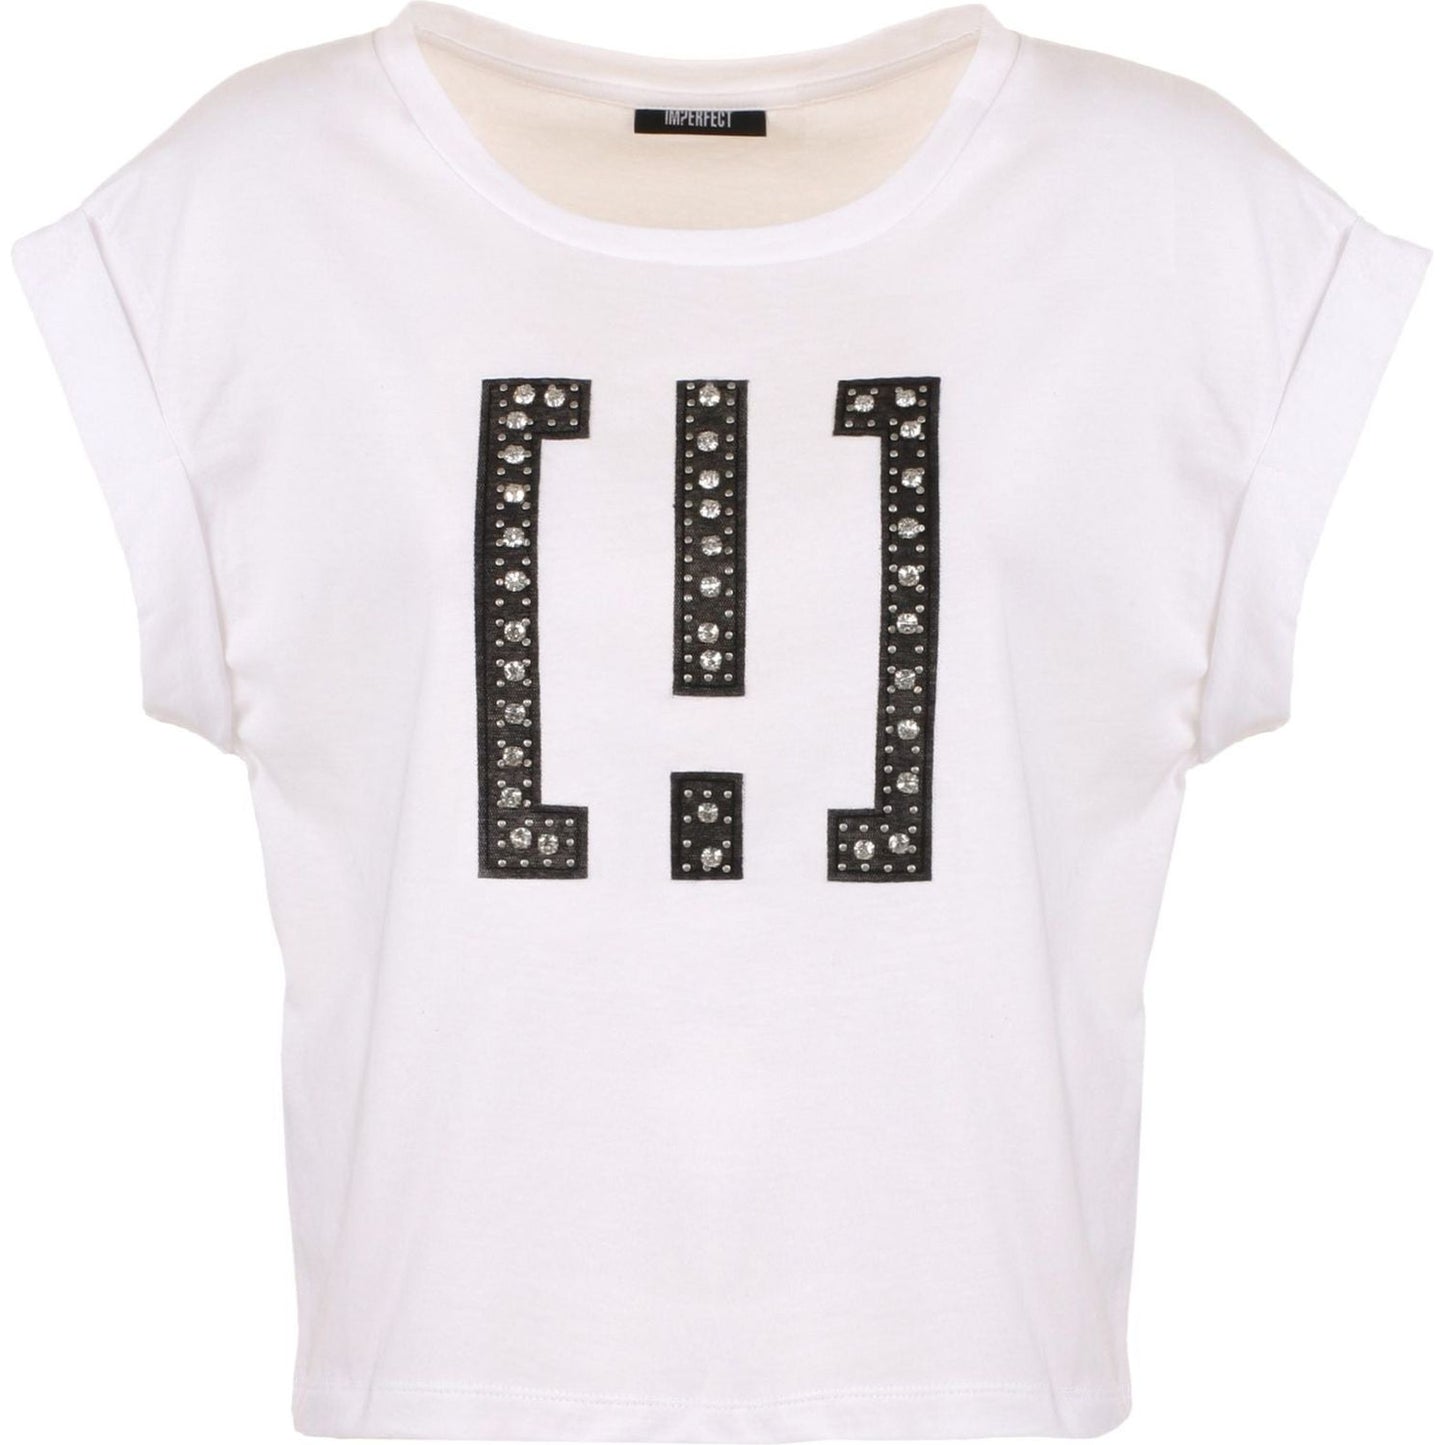 Imperfect Chic White Cotton Tee with Brass Accents chic-white-cotton-tee-with-brass-accents